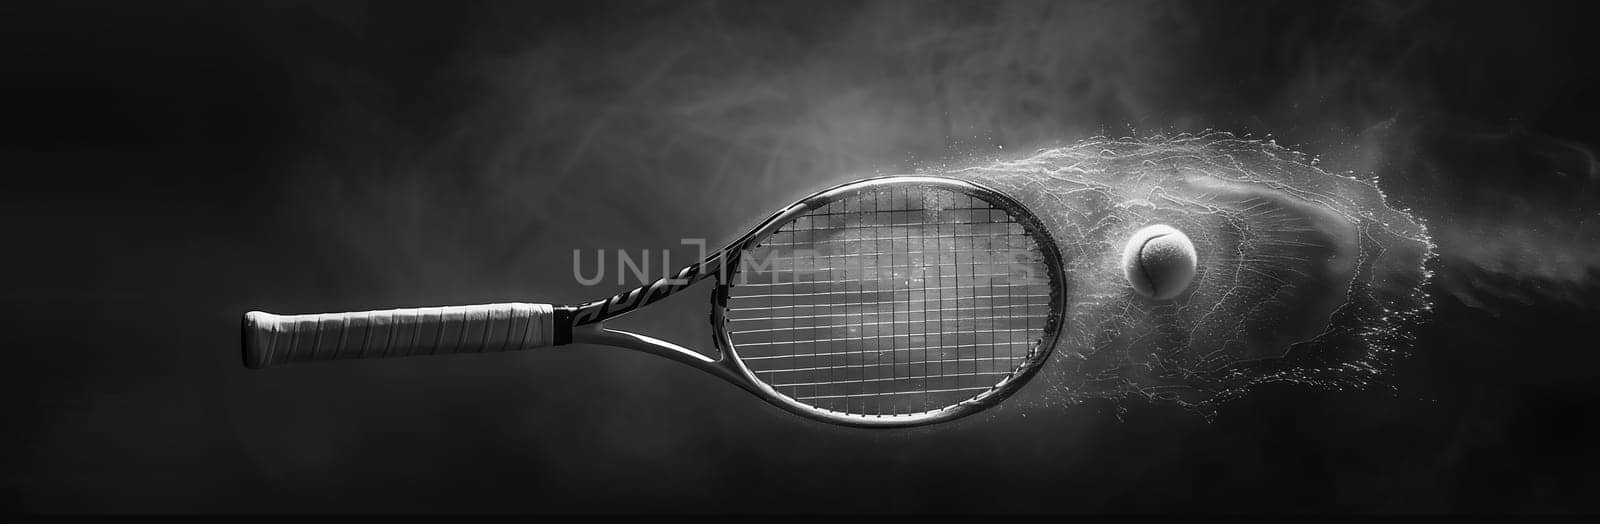 Tennis racket racquet isolated against a black background in black and white by Andelov13